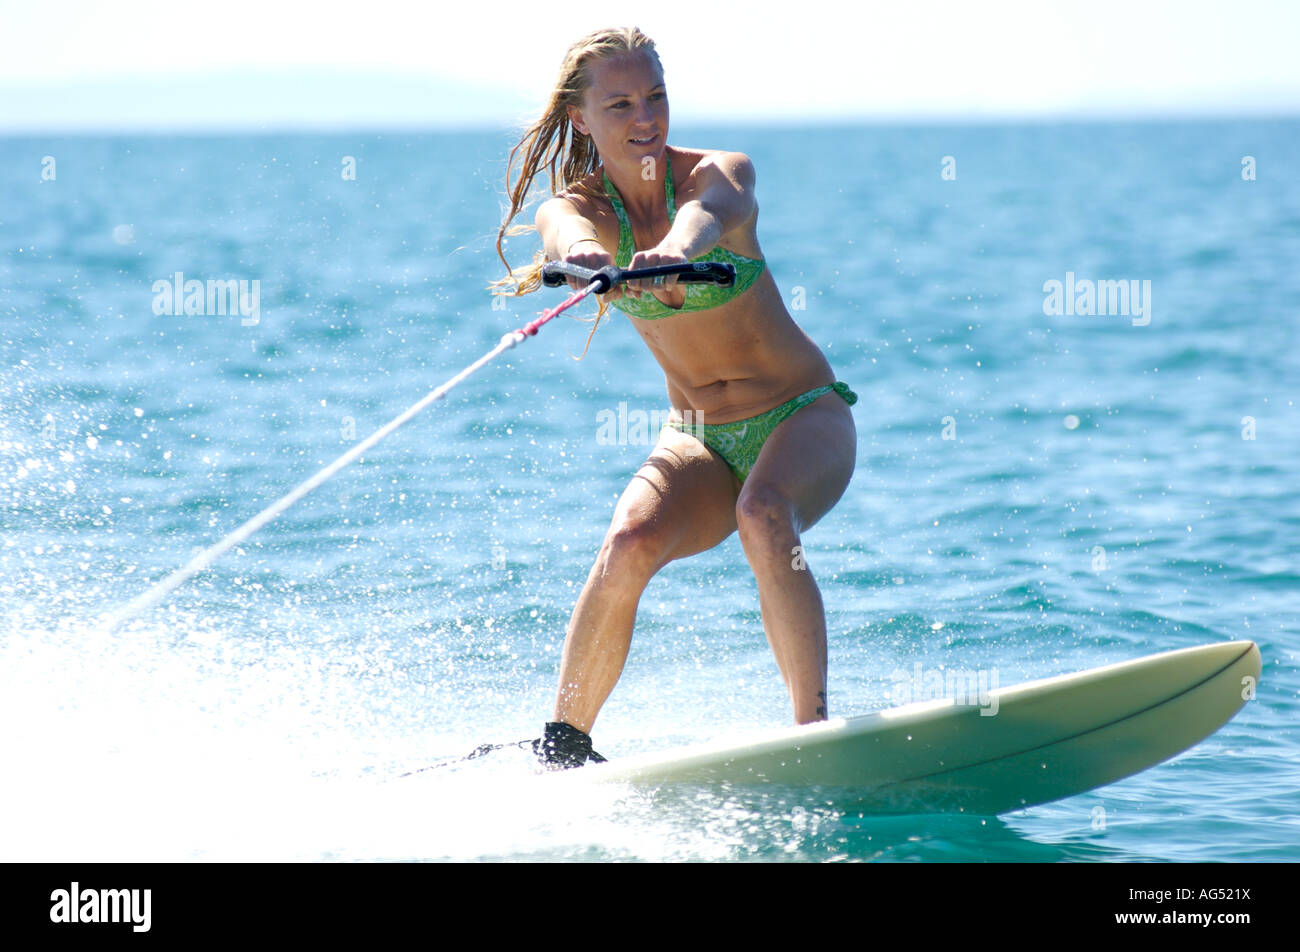 Blonde woman tow surfing Stock Photo